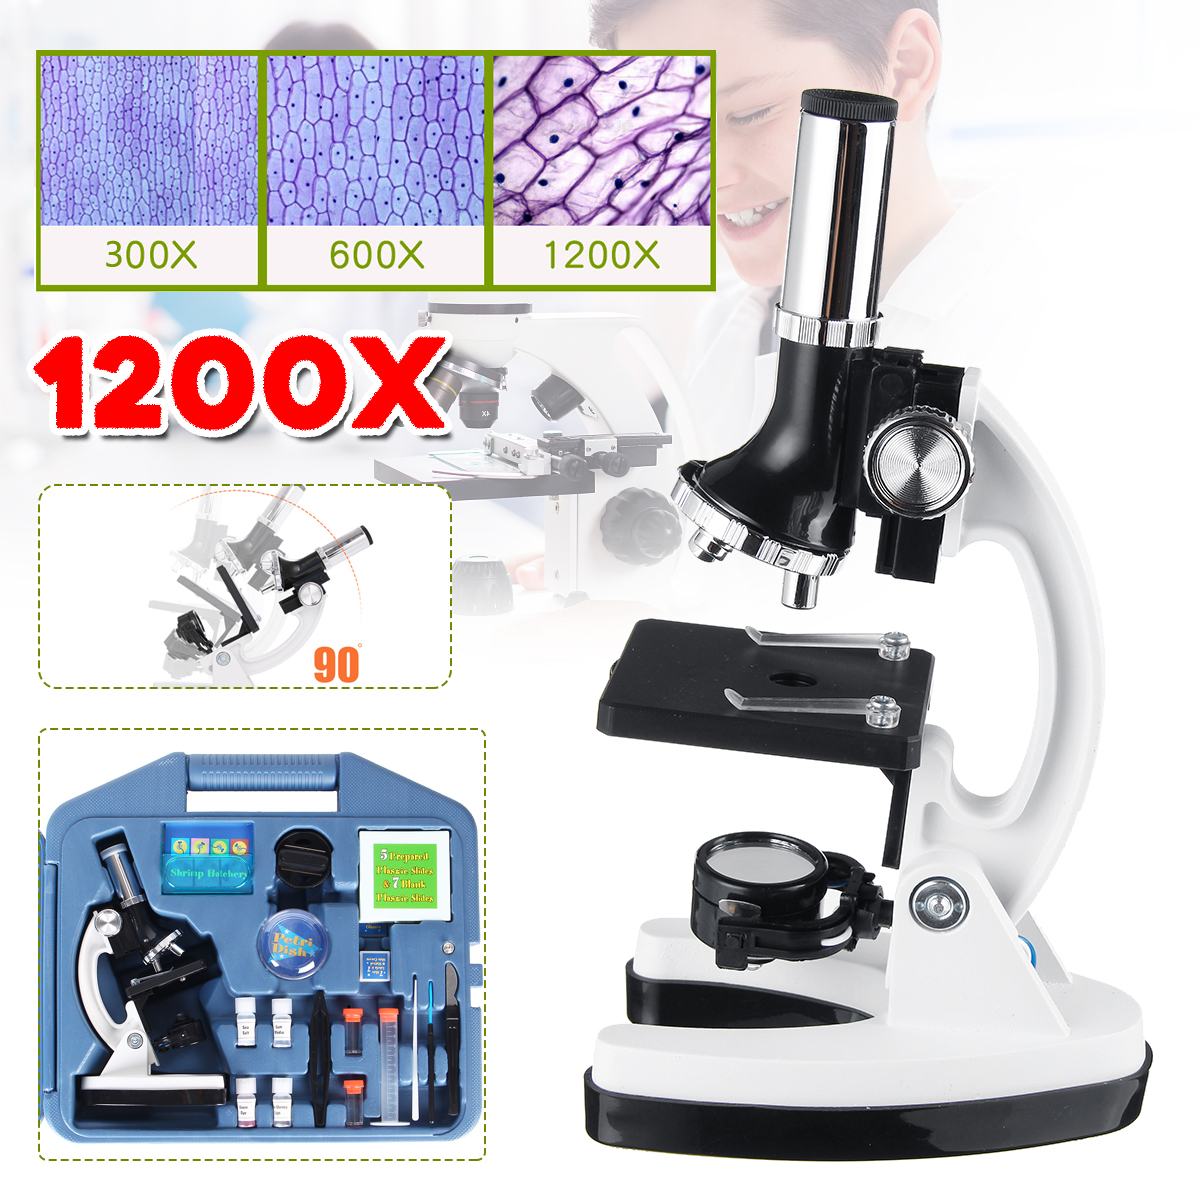 LED-Science-Microscope-Kit-for-Children-1200x-1200-Scientific-Instruments-Toy-Set-for-Early-Educatio-1497774-3